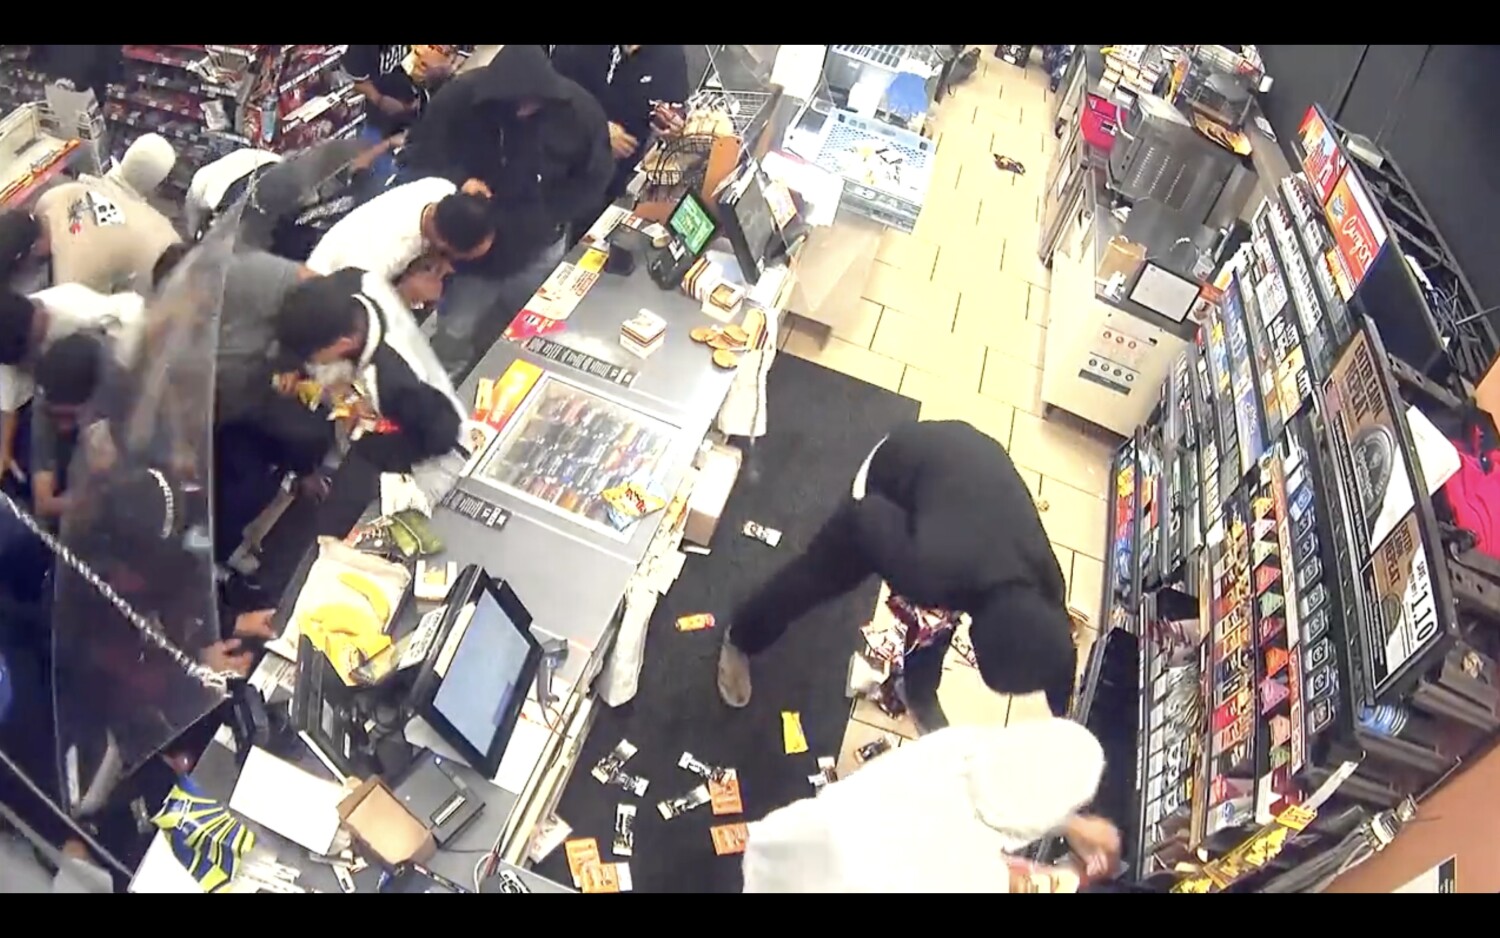 L.A. street takeover participants ransacked 7-Eleven, LAPD says